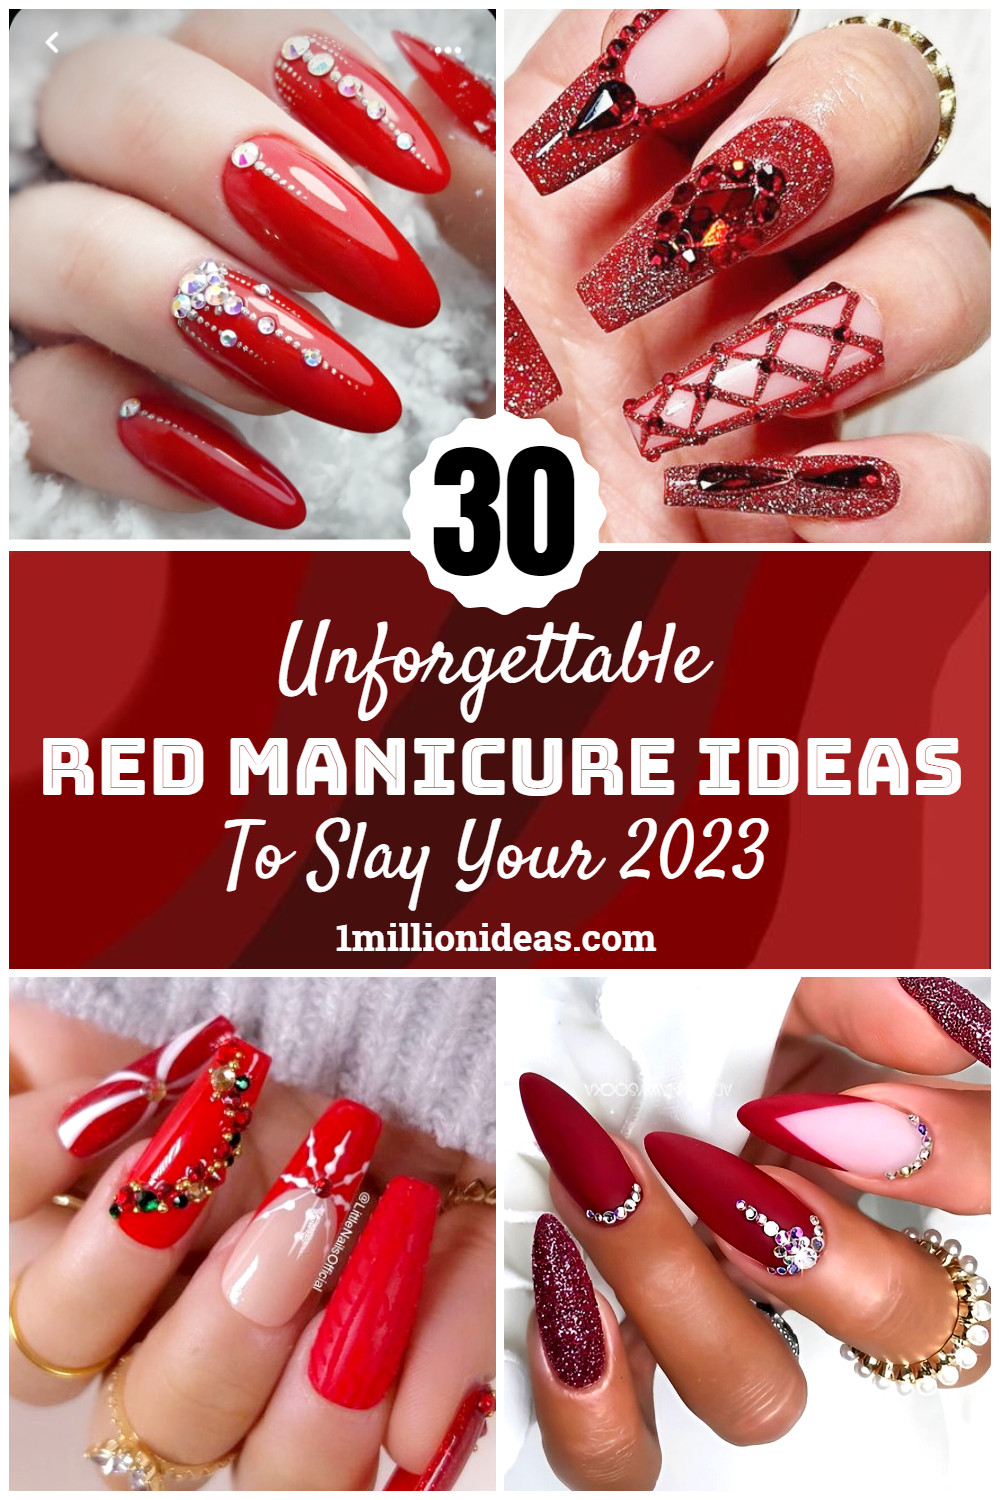 30 Unforgettable Red Manicure Ideas To Slay Your 2023 - 191